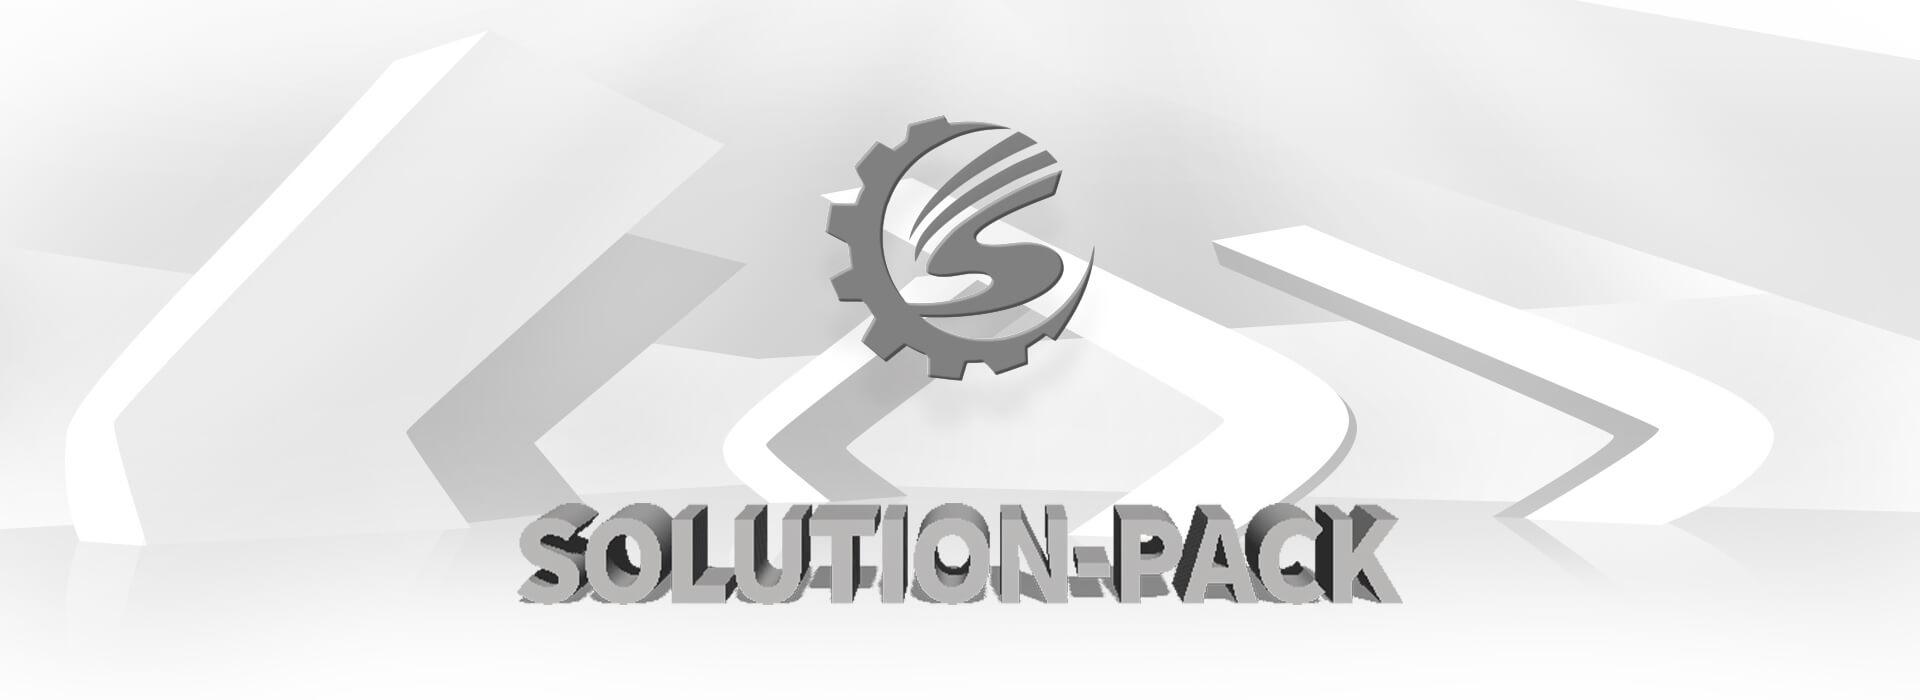 Contact Us Solution Pack Flexible Packaging Equipment